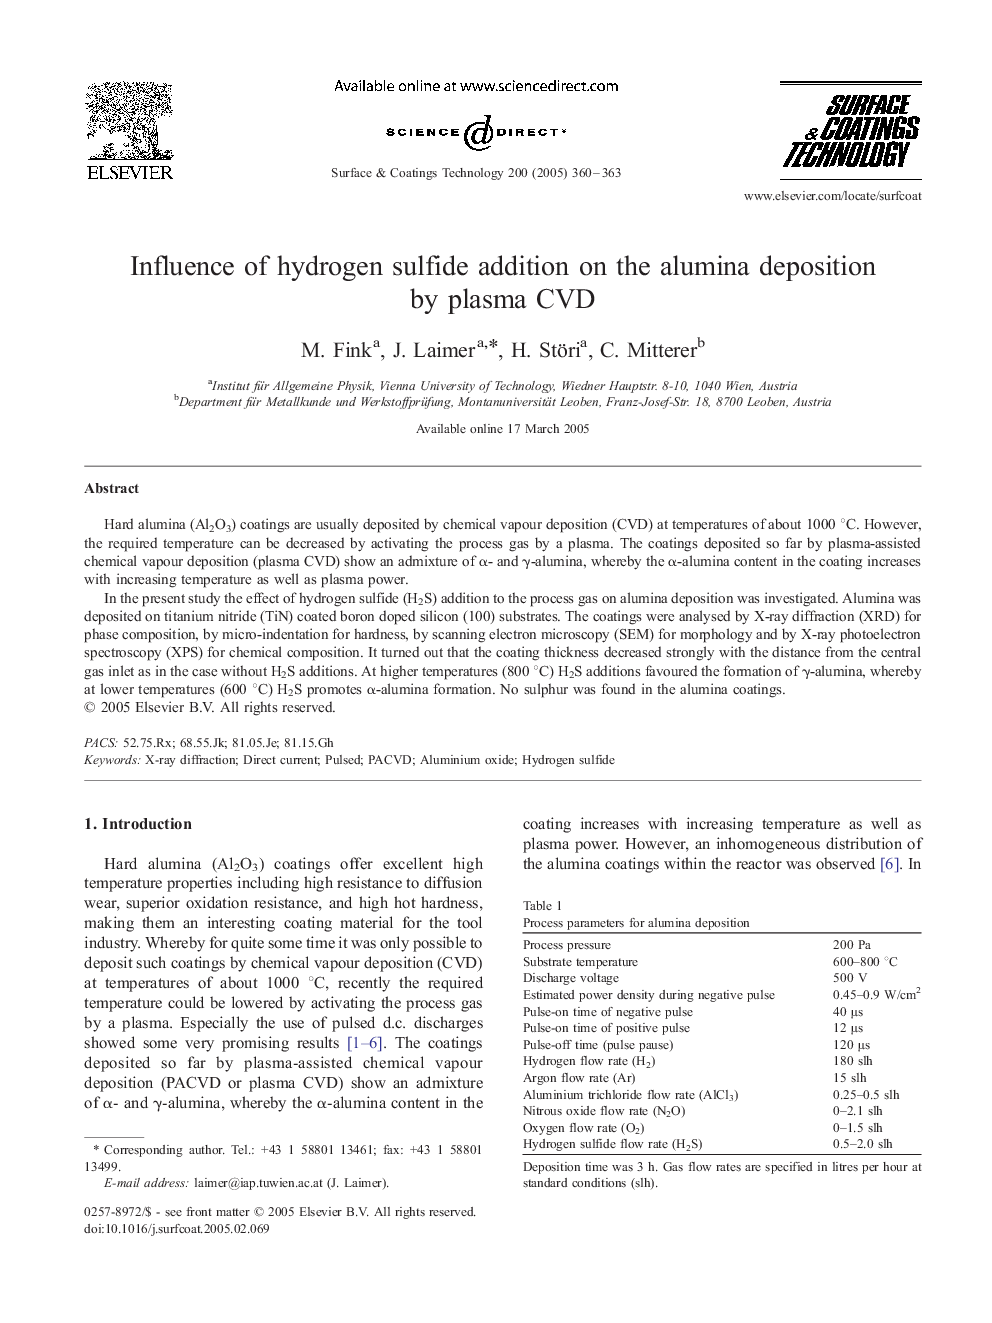 Influence of hydrogen sulfide addition on the alumina deposition by plasma CVD